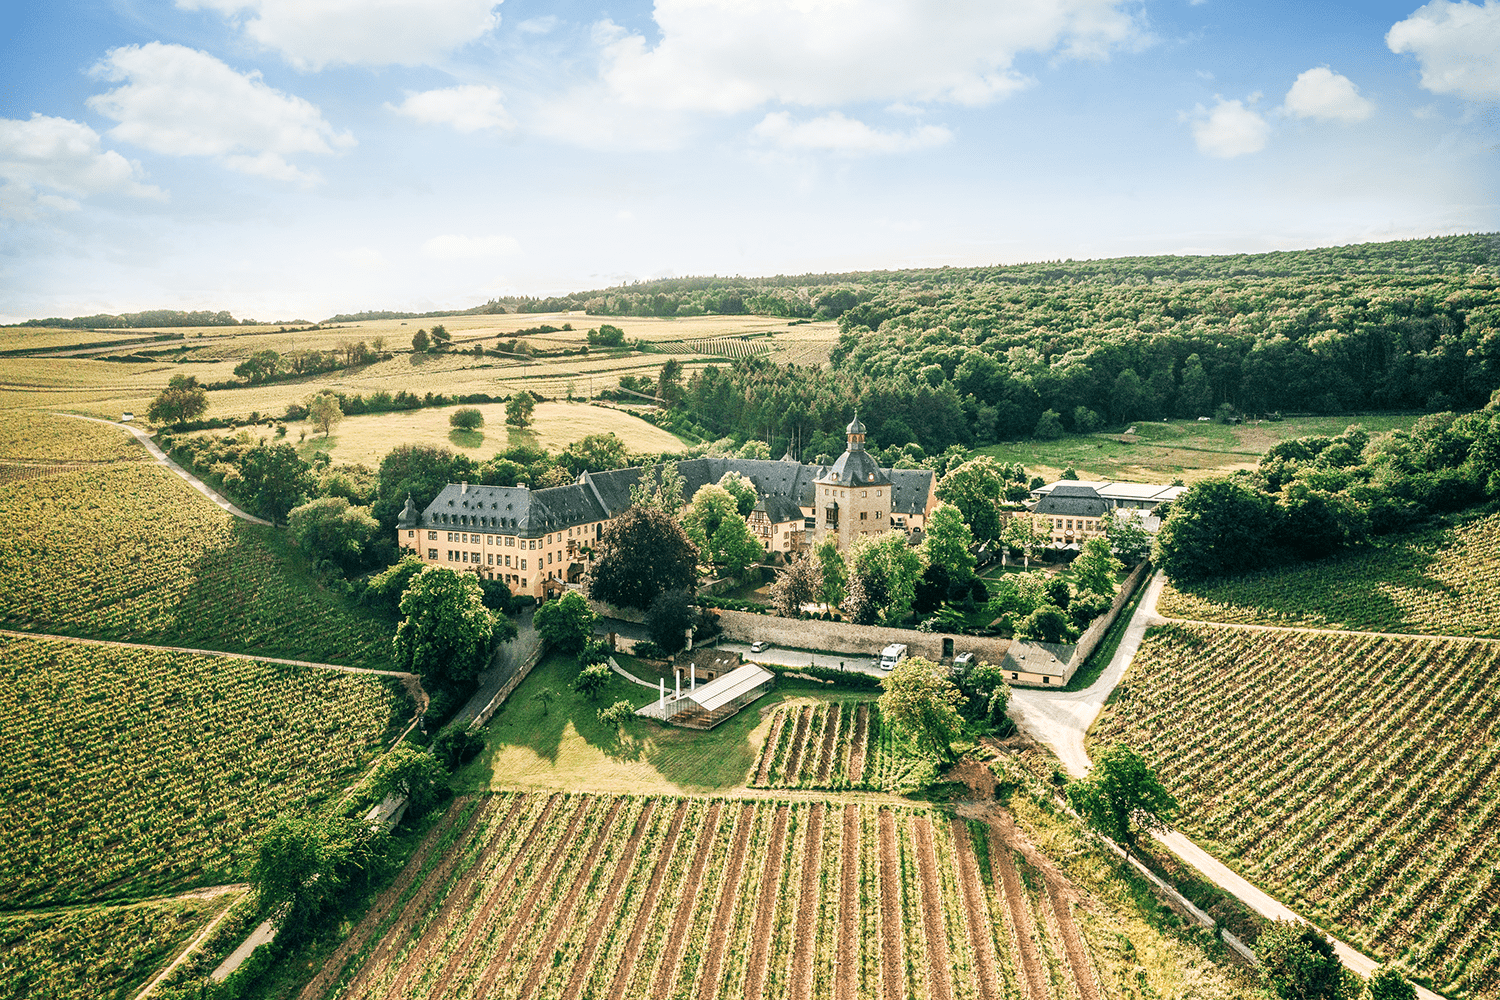 Winery Schloss Vollrads aerial view